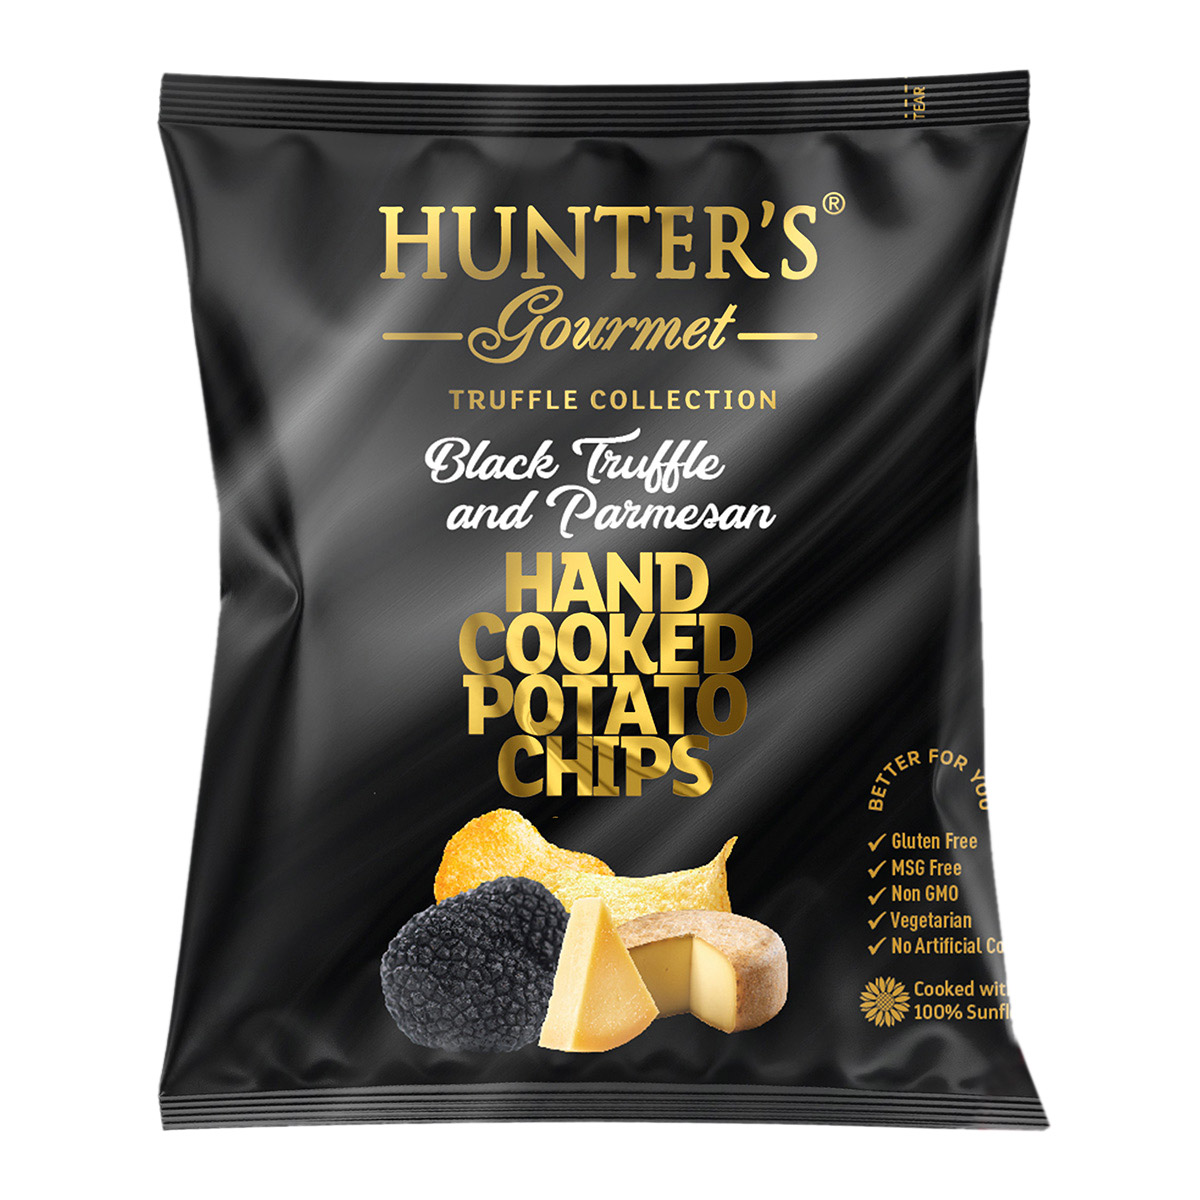 Hunter’s Gourmet Hand Cooked Potato Chips – Black Truffle and Parmesan 125g